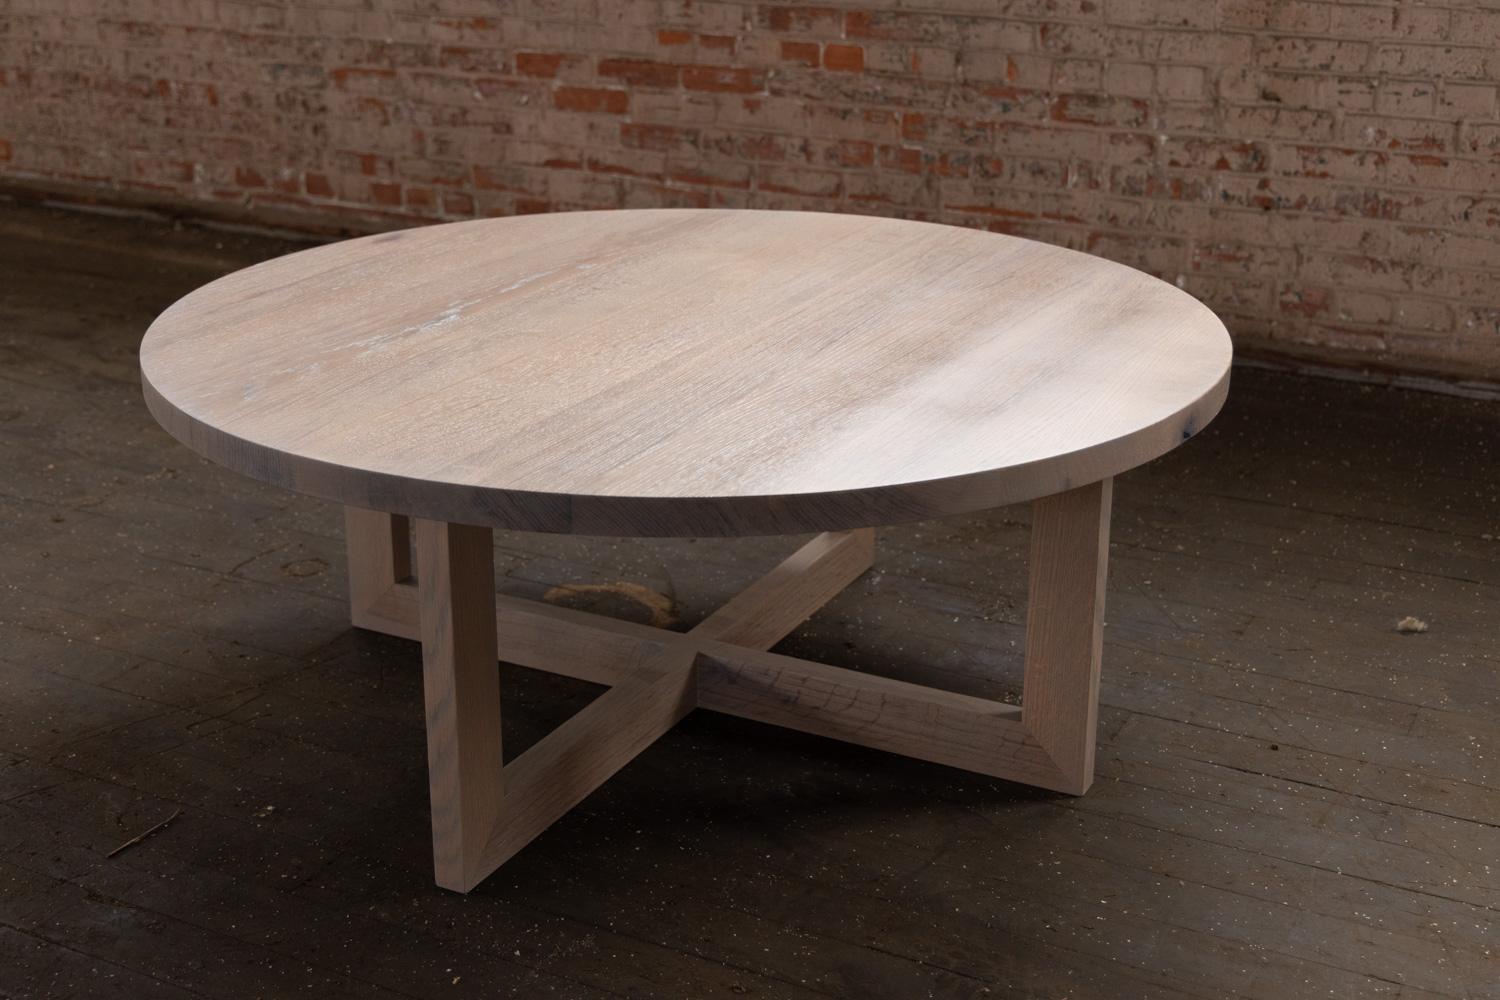 American Craftsman Round Grey Wood Coffee Table in Stained Urban Oak by Alabama Sawyer